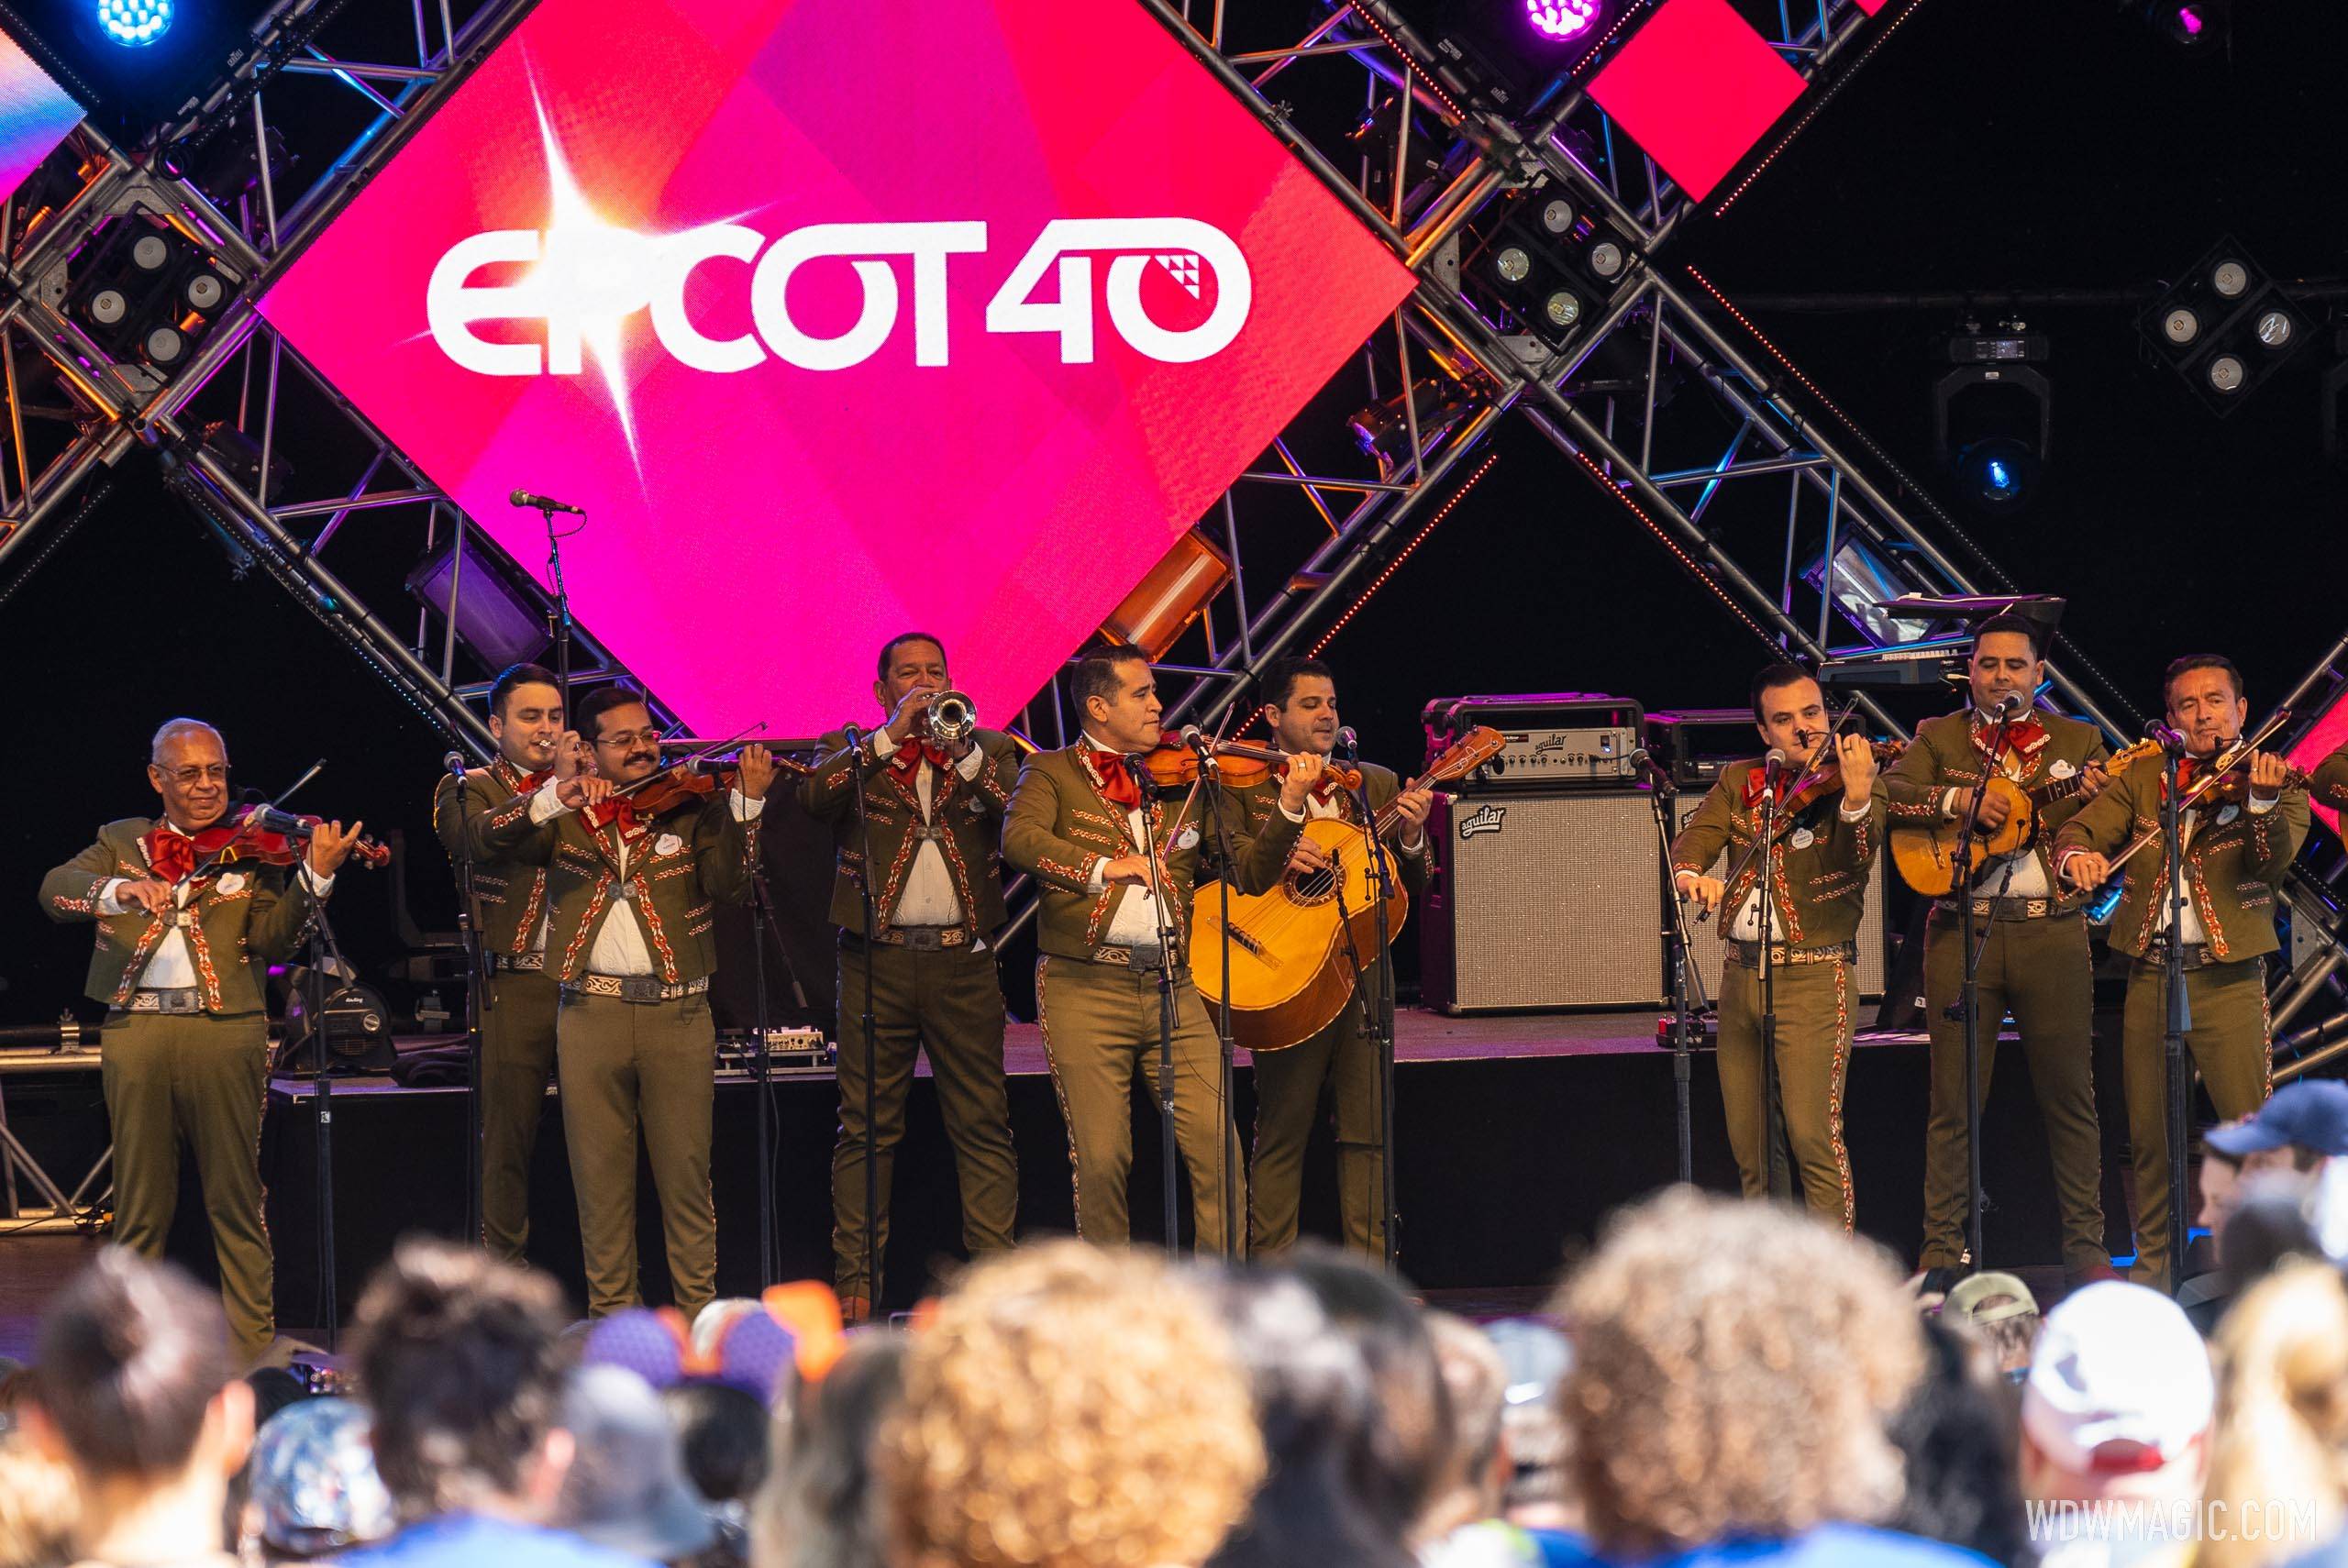 PHOTOS and VIDEO - EPCOT 40th Anniversary Ceremony